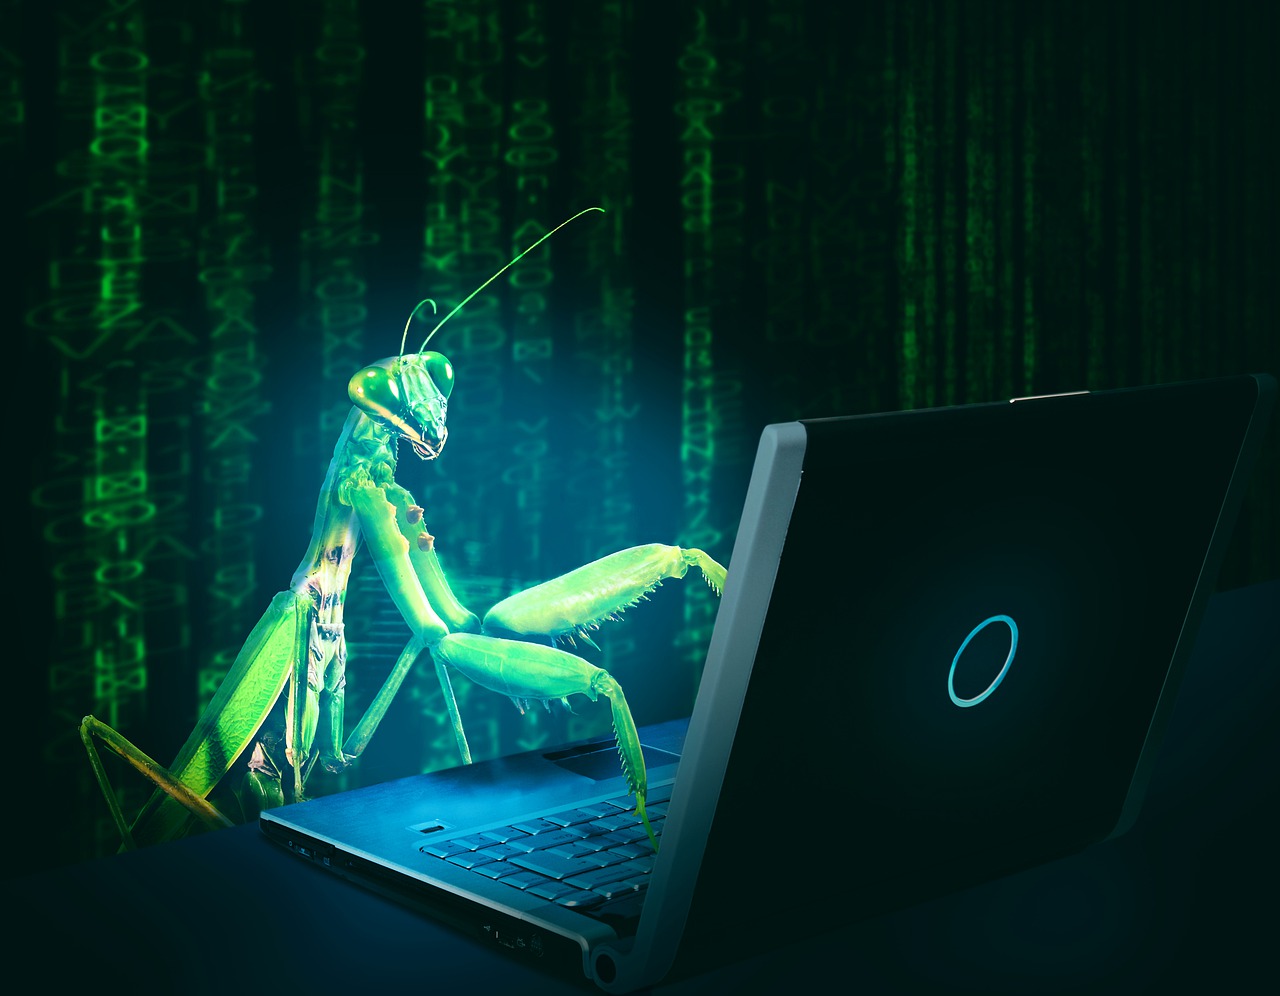 difference between virus malware adware trojans ransomware